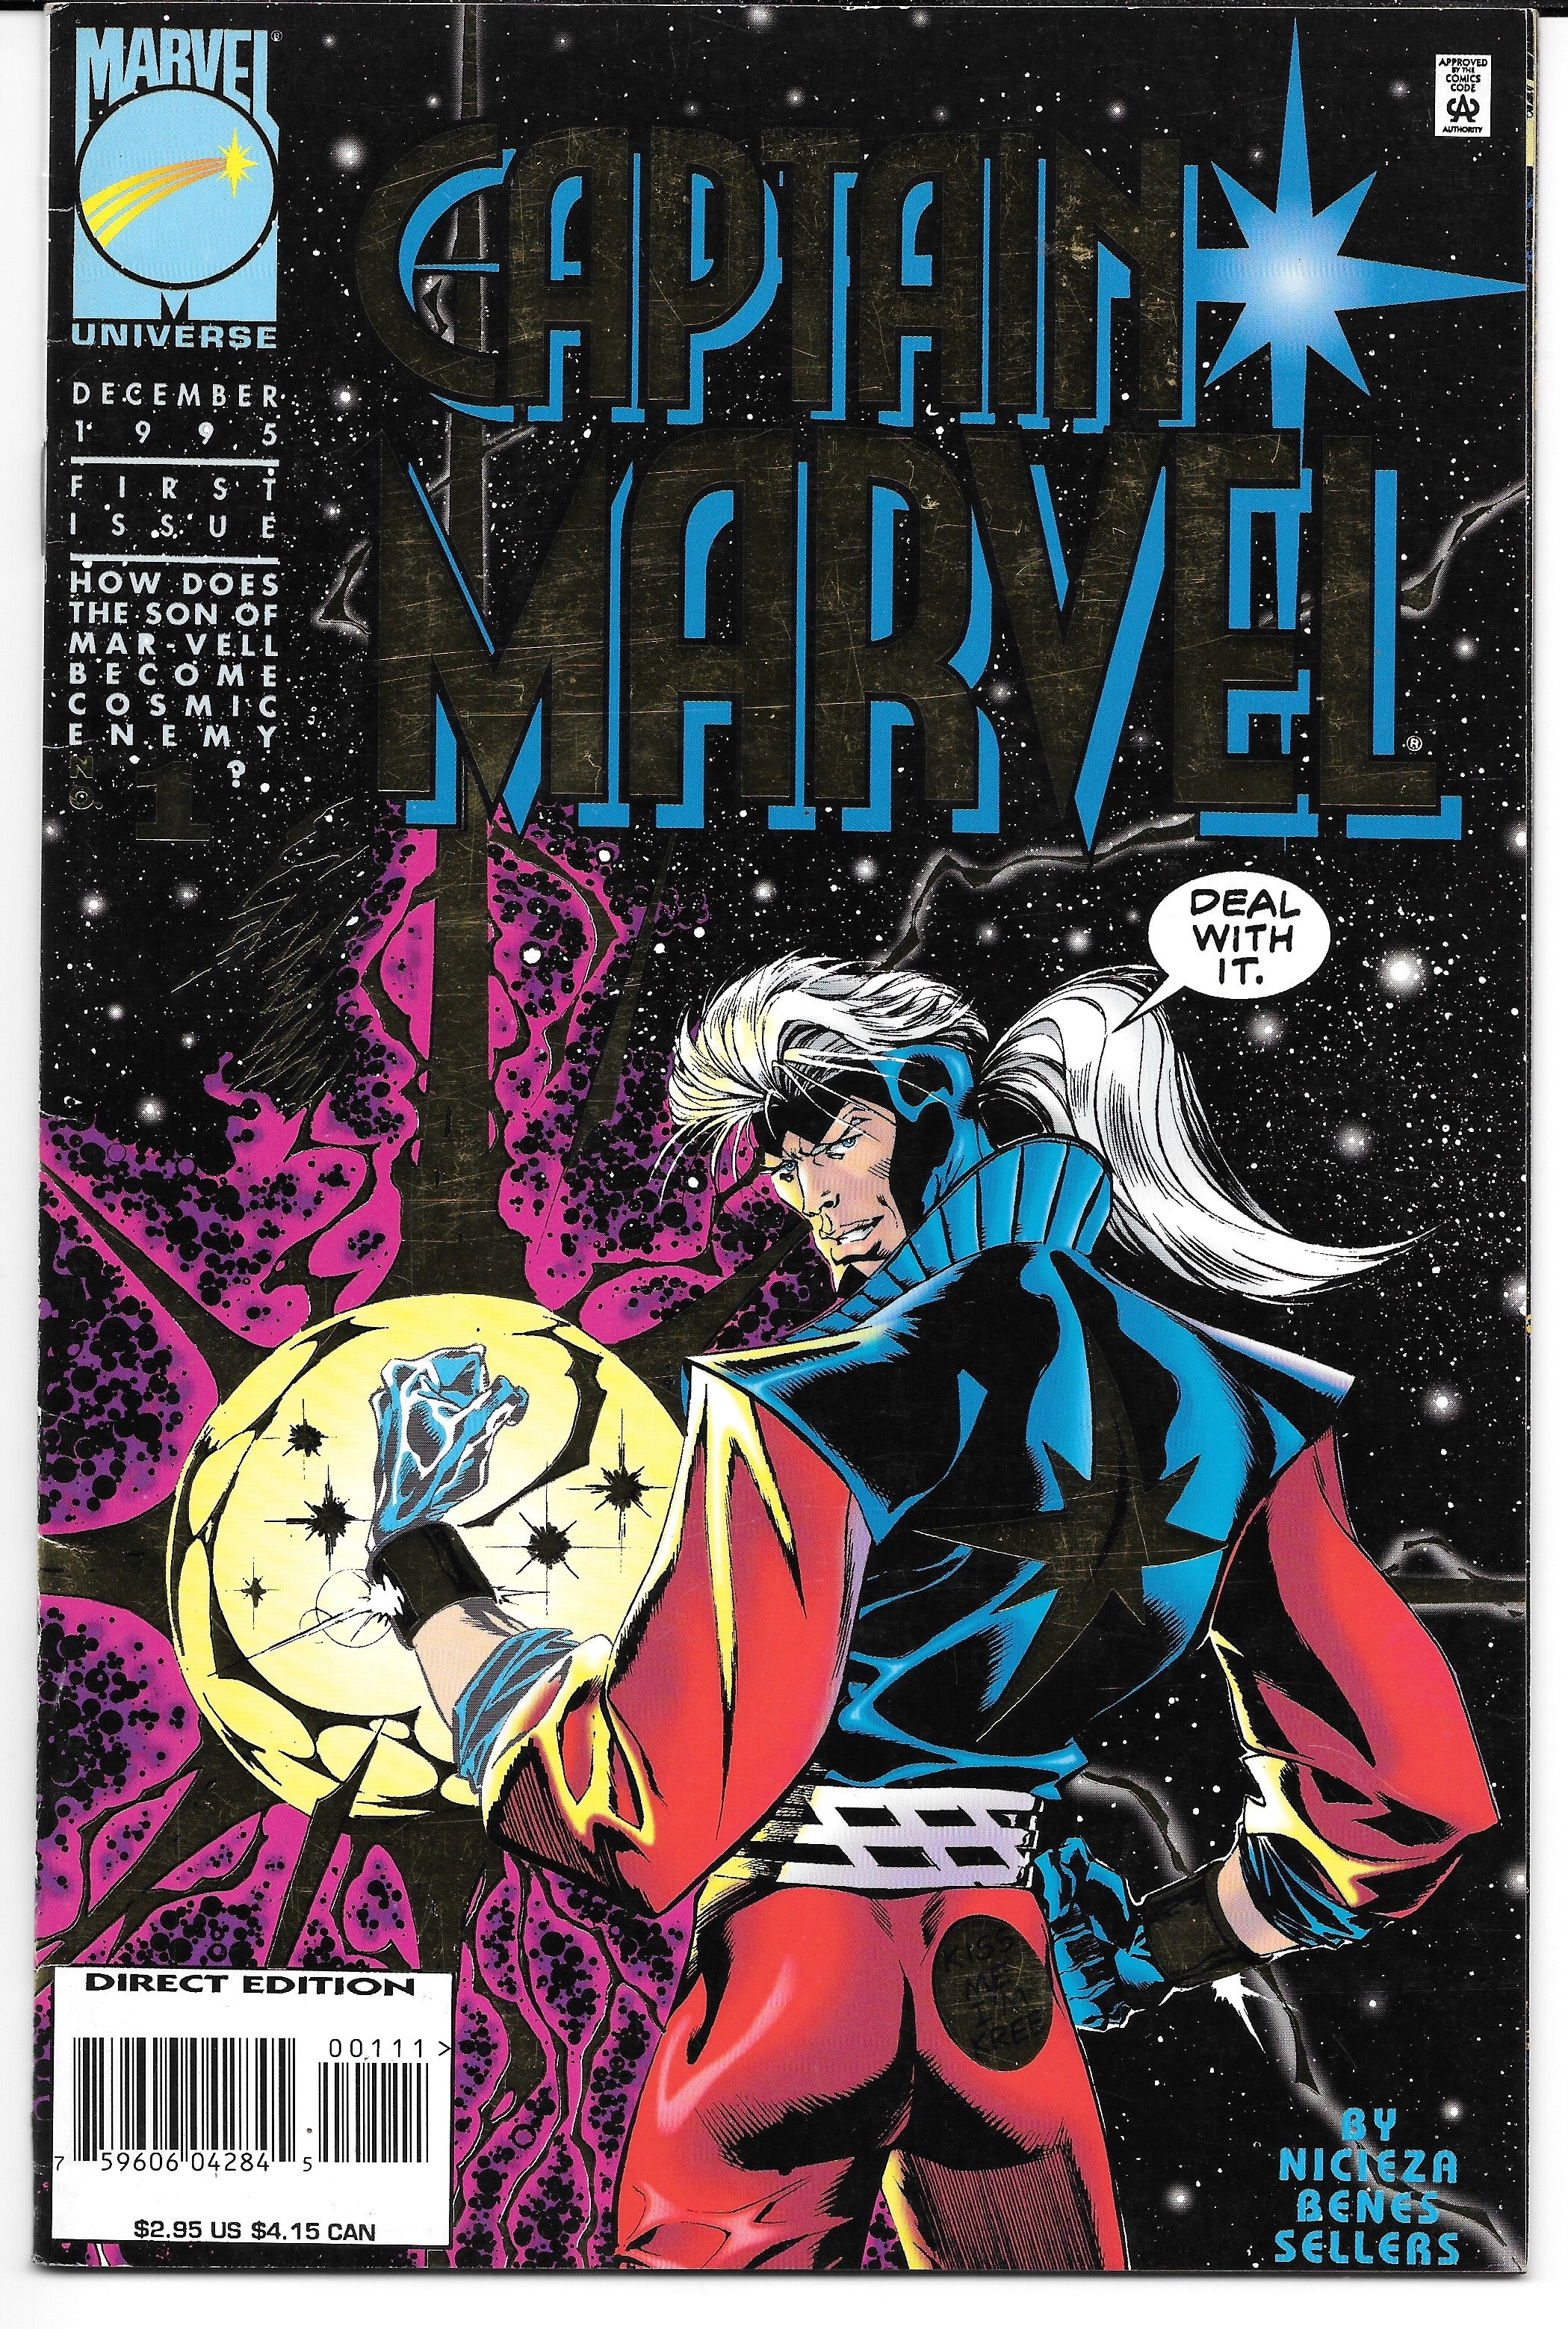 Photo of Captain Marvel, Vol. 4 (1995) Issue 1 - Very Fine Comic sold by Stronghold Collectibles